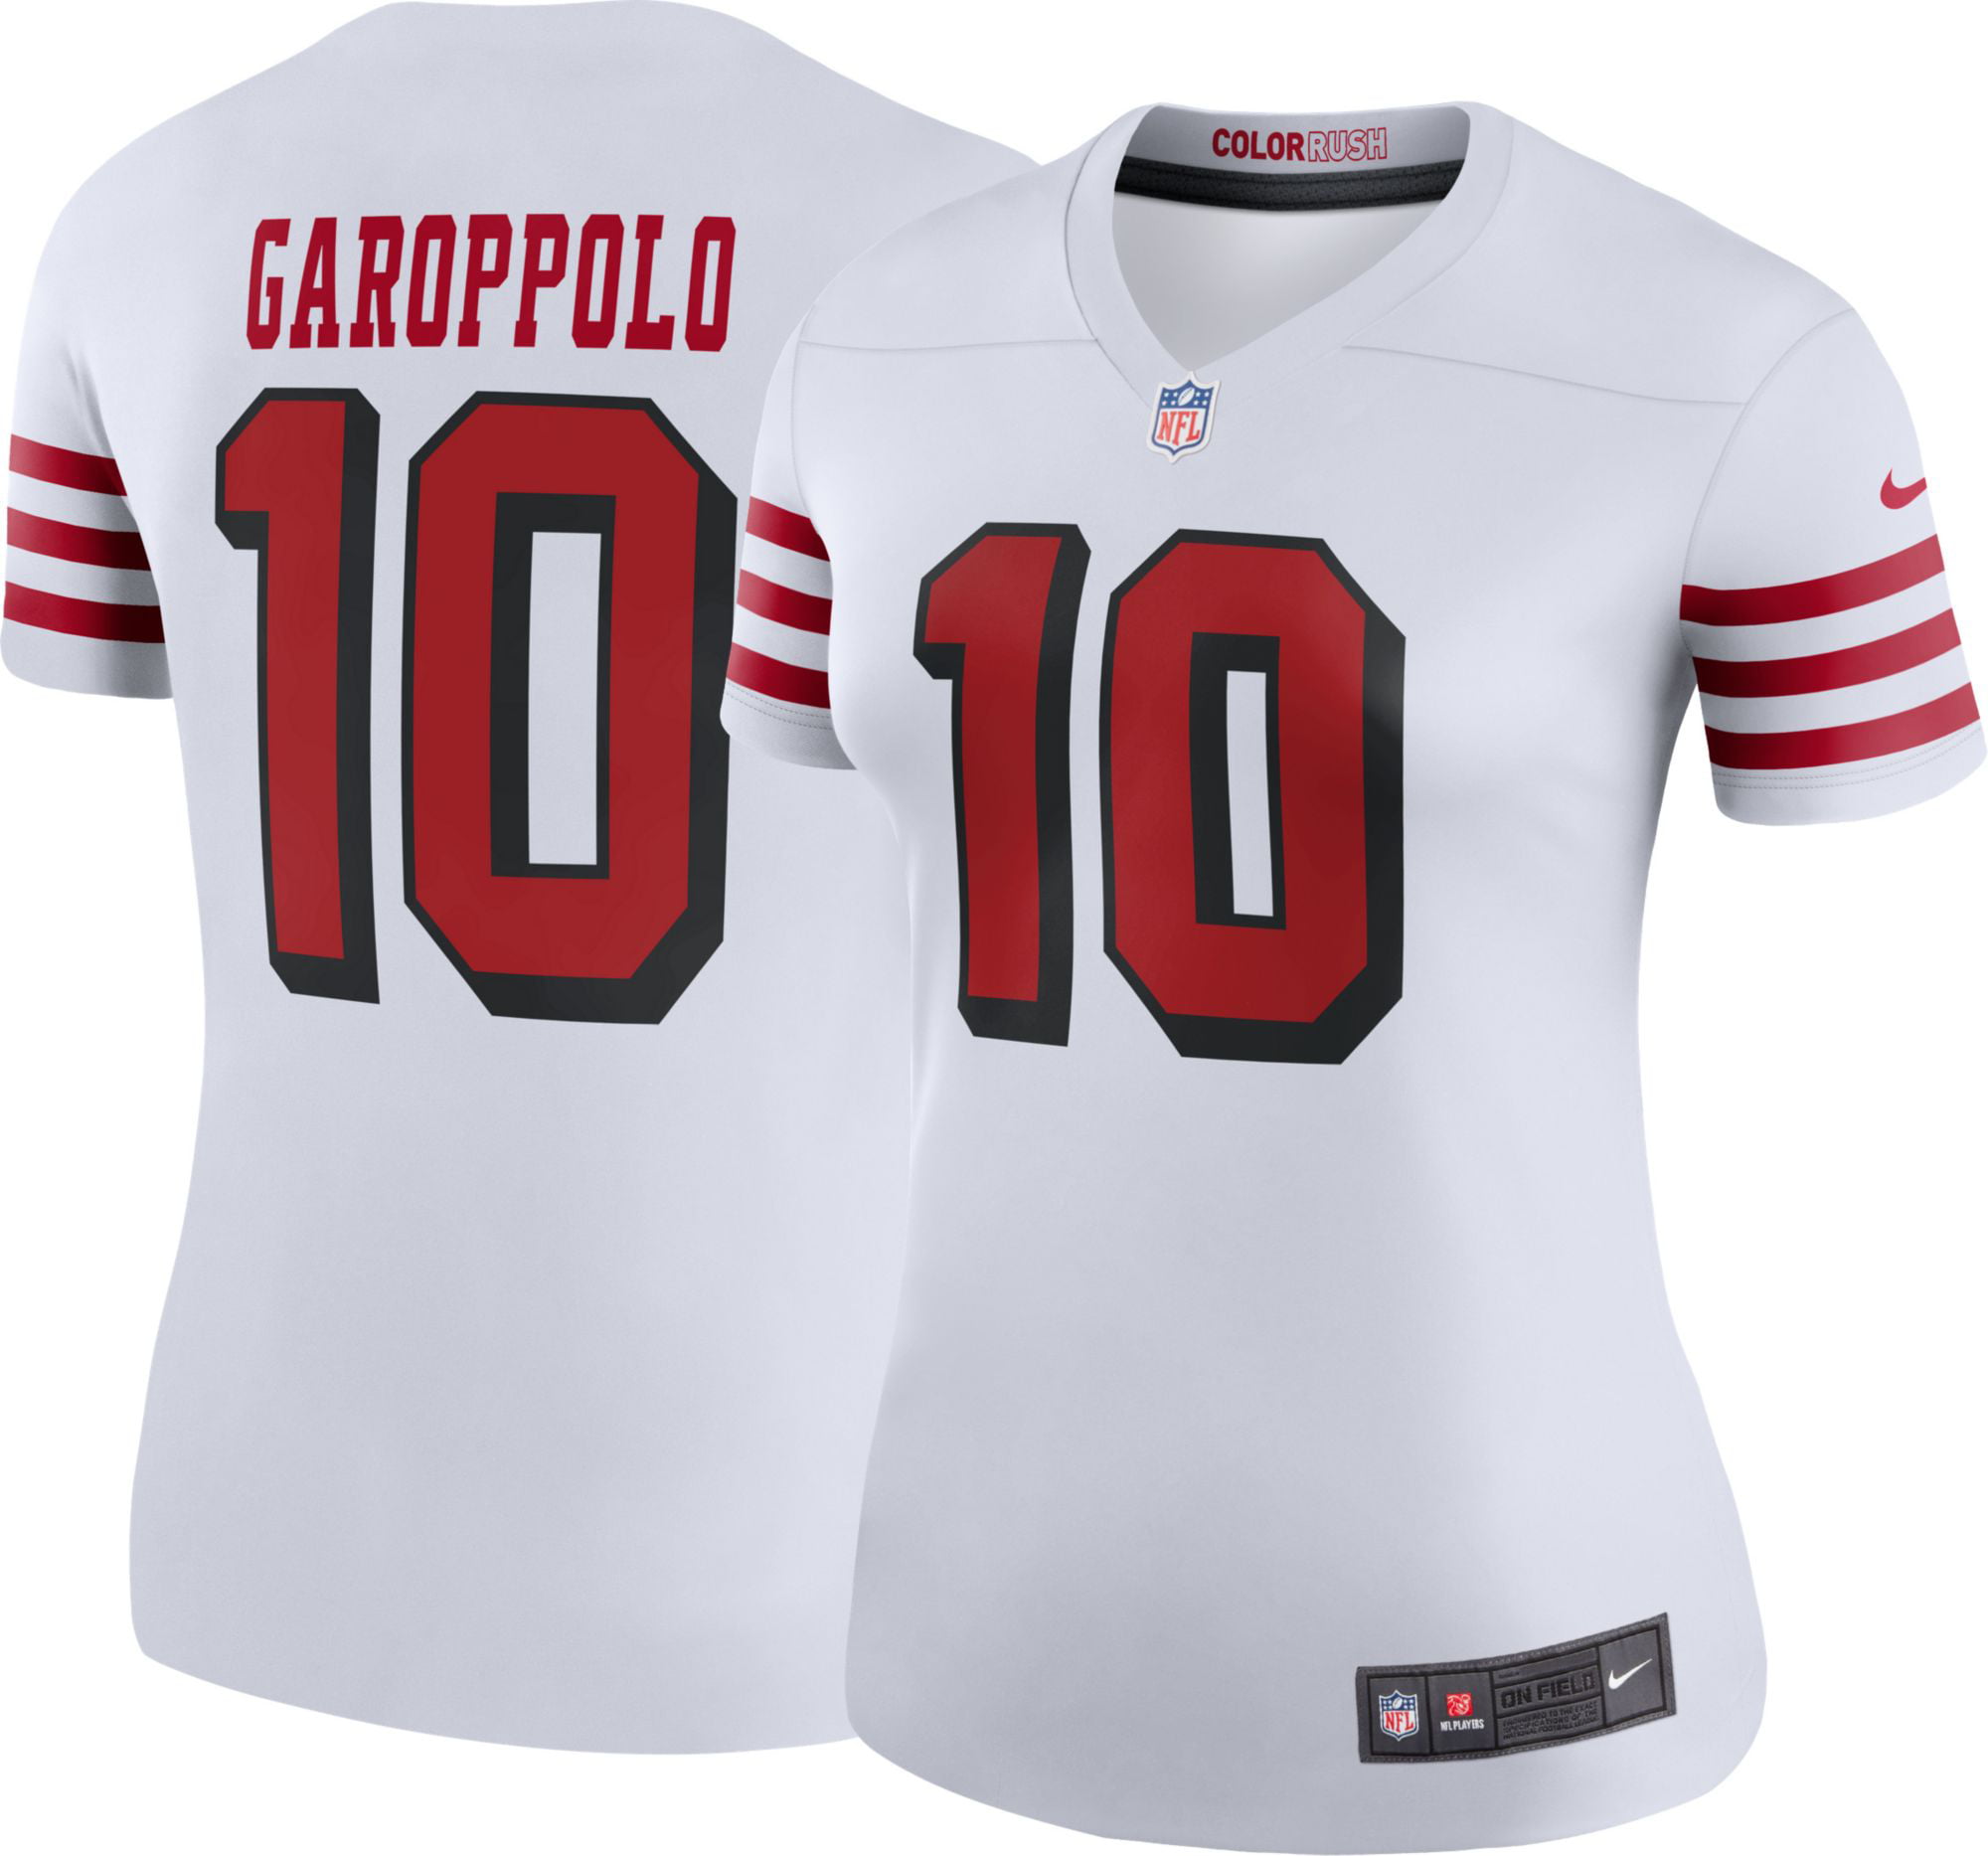 49ers 10 jersey